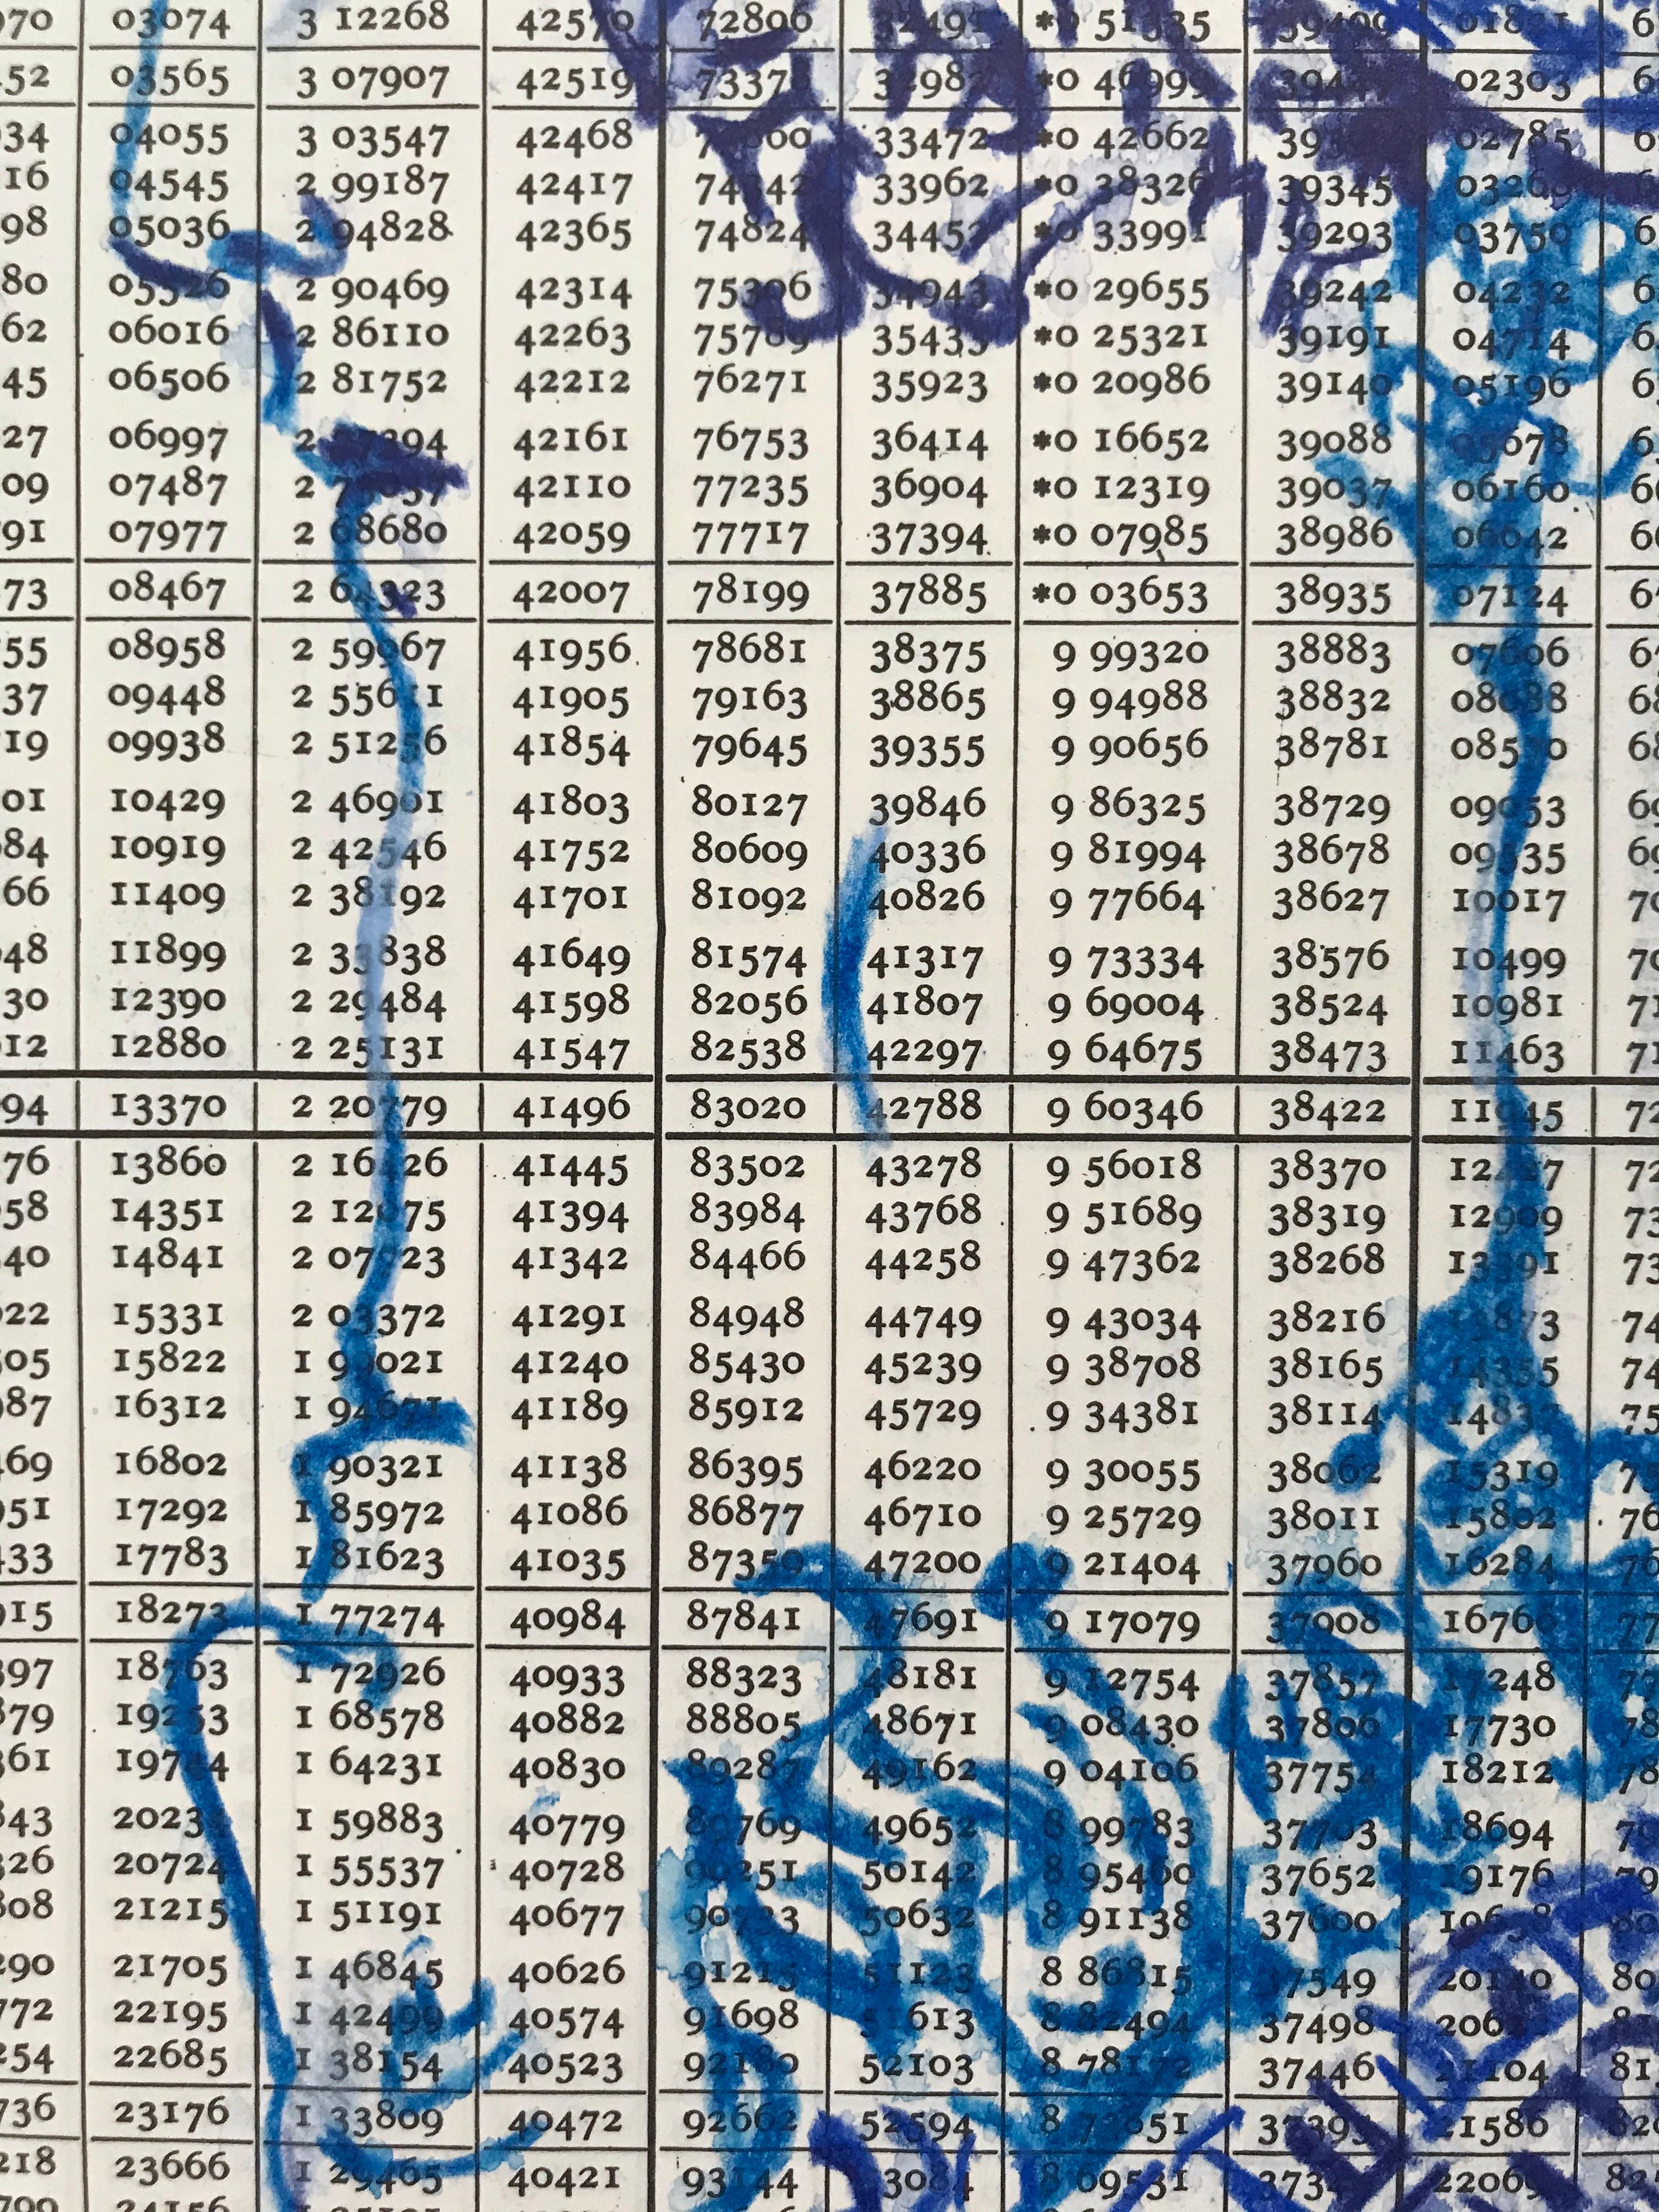 Brian Fekete’s “No. 123” is a small, unframed, monochromatic 10 x 8 inch watercolor pencil drawing in deep blue of a woman’s head in profile on a page from a 1943 trigonometry resource printed with regular columns of numerical results. Reflected